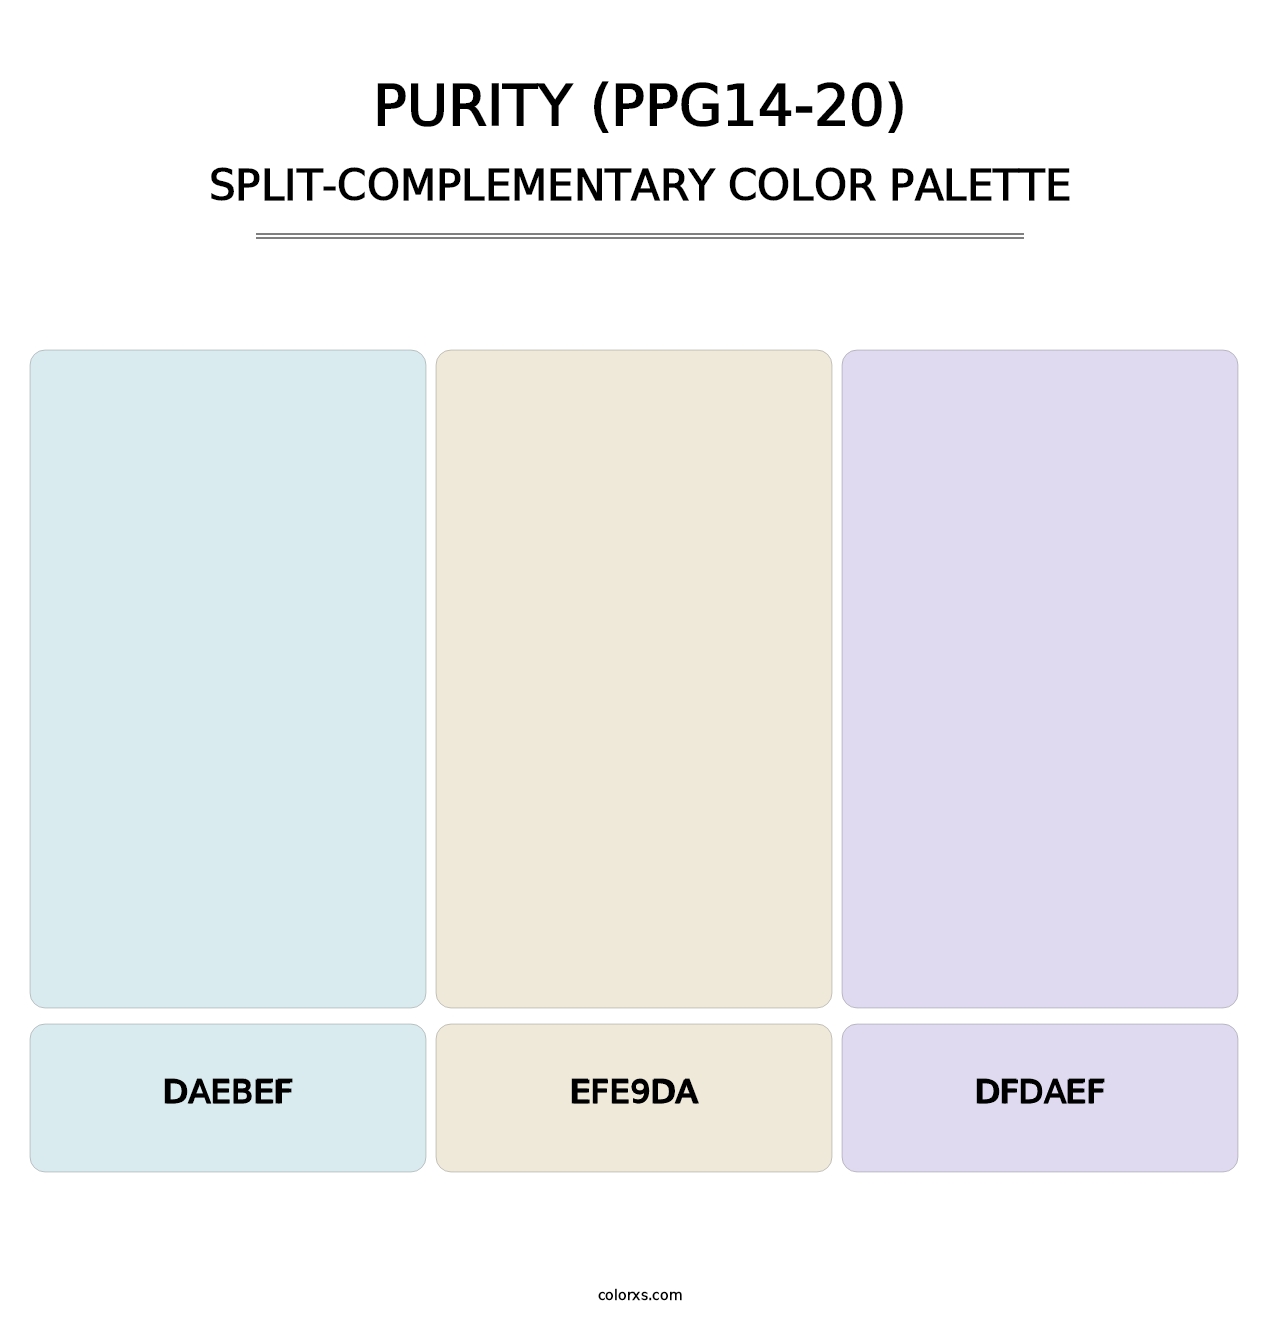 Purity (PPG14-20) - Split-Complementary Color Palette